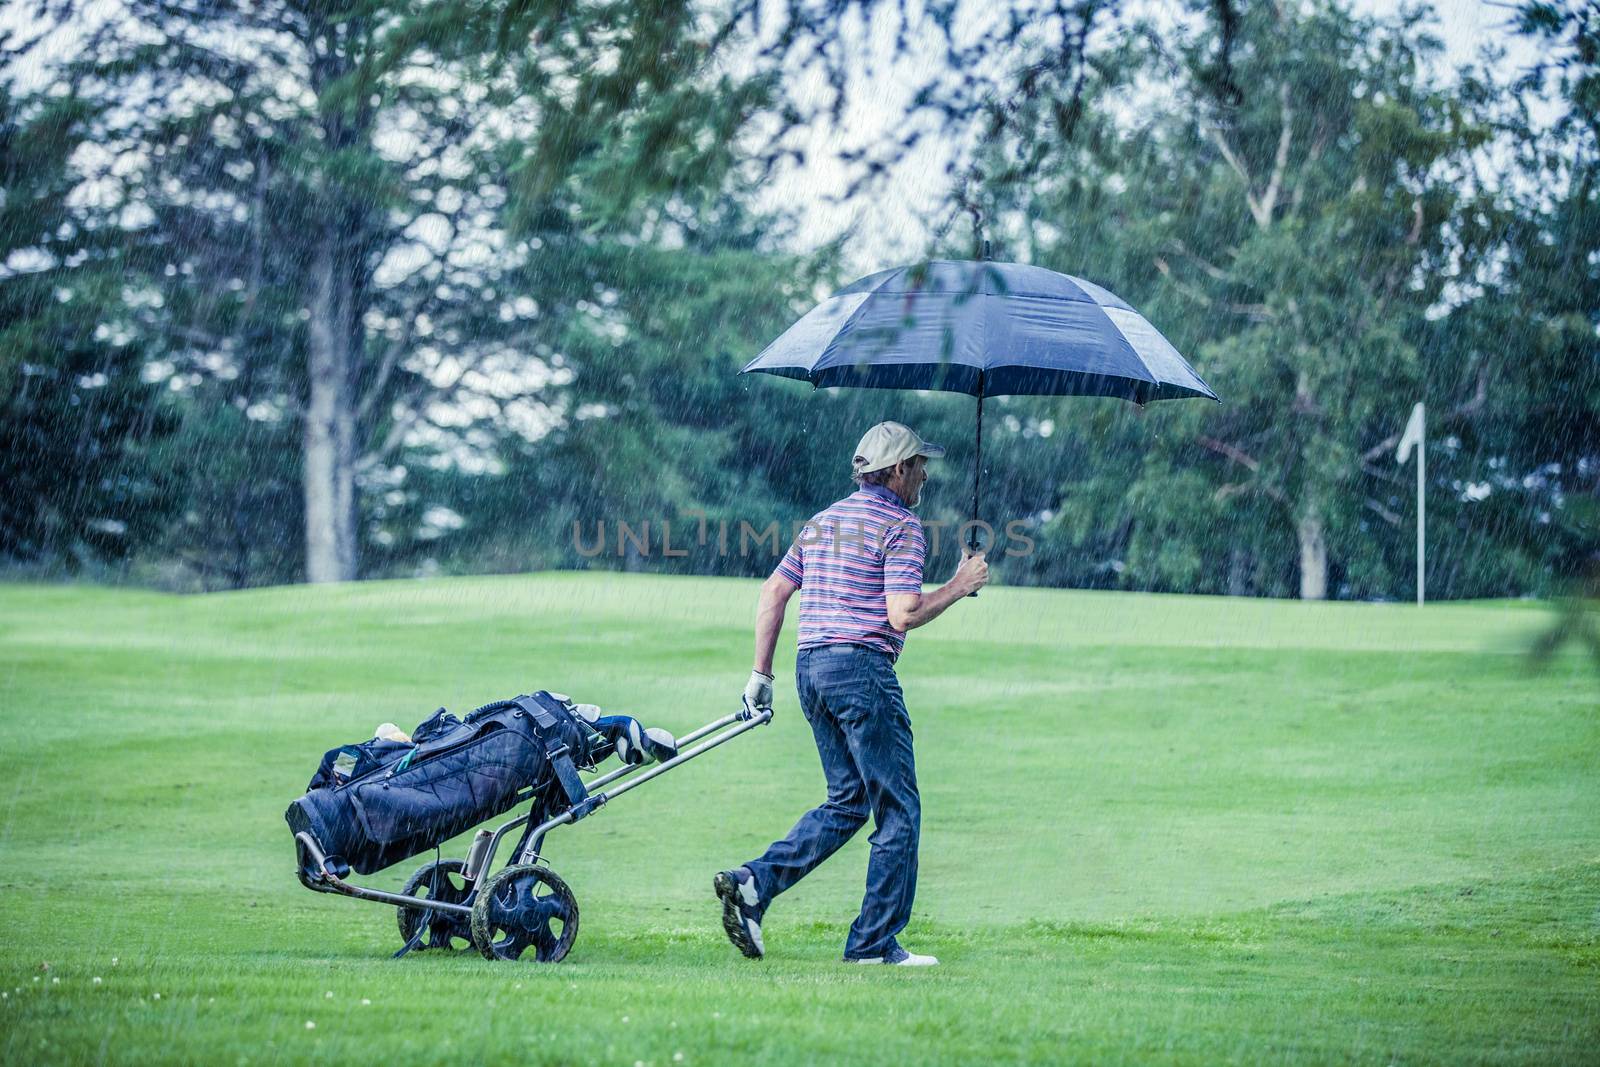 Golfer on a Rainy Day Leaving the Golf Course by aetb